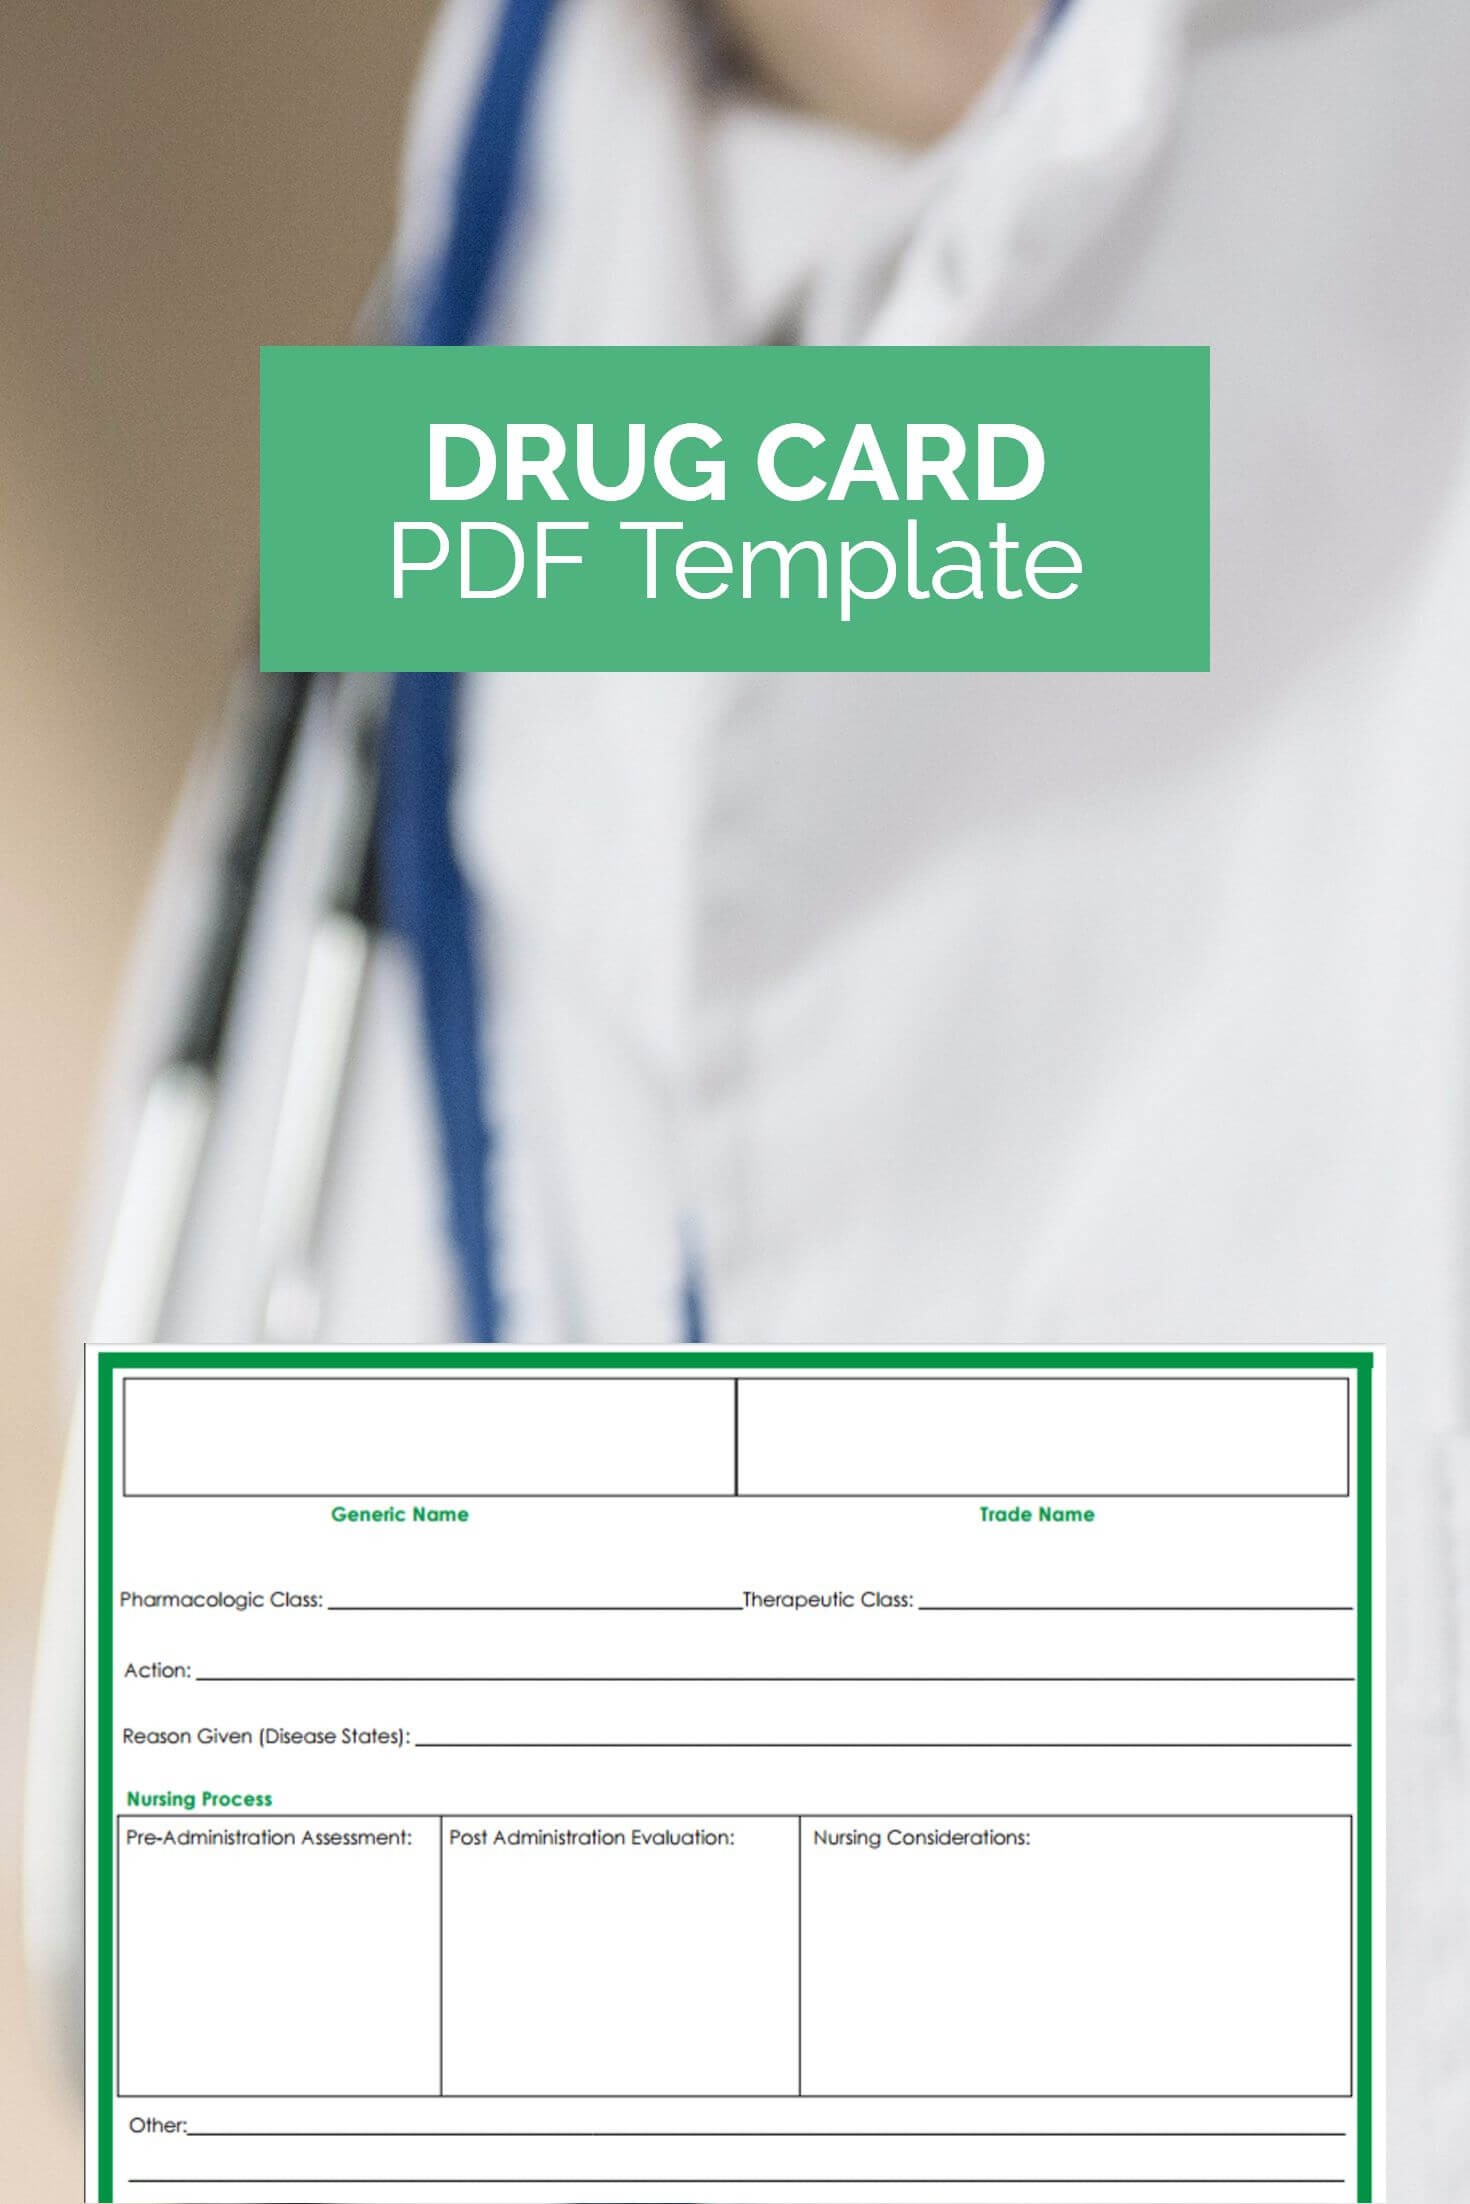 Want A Free Drug Card Template That Can Make Studying Much With Pharmacology Drug Card Template